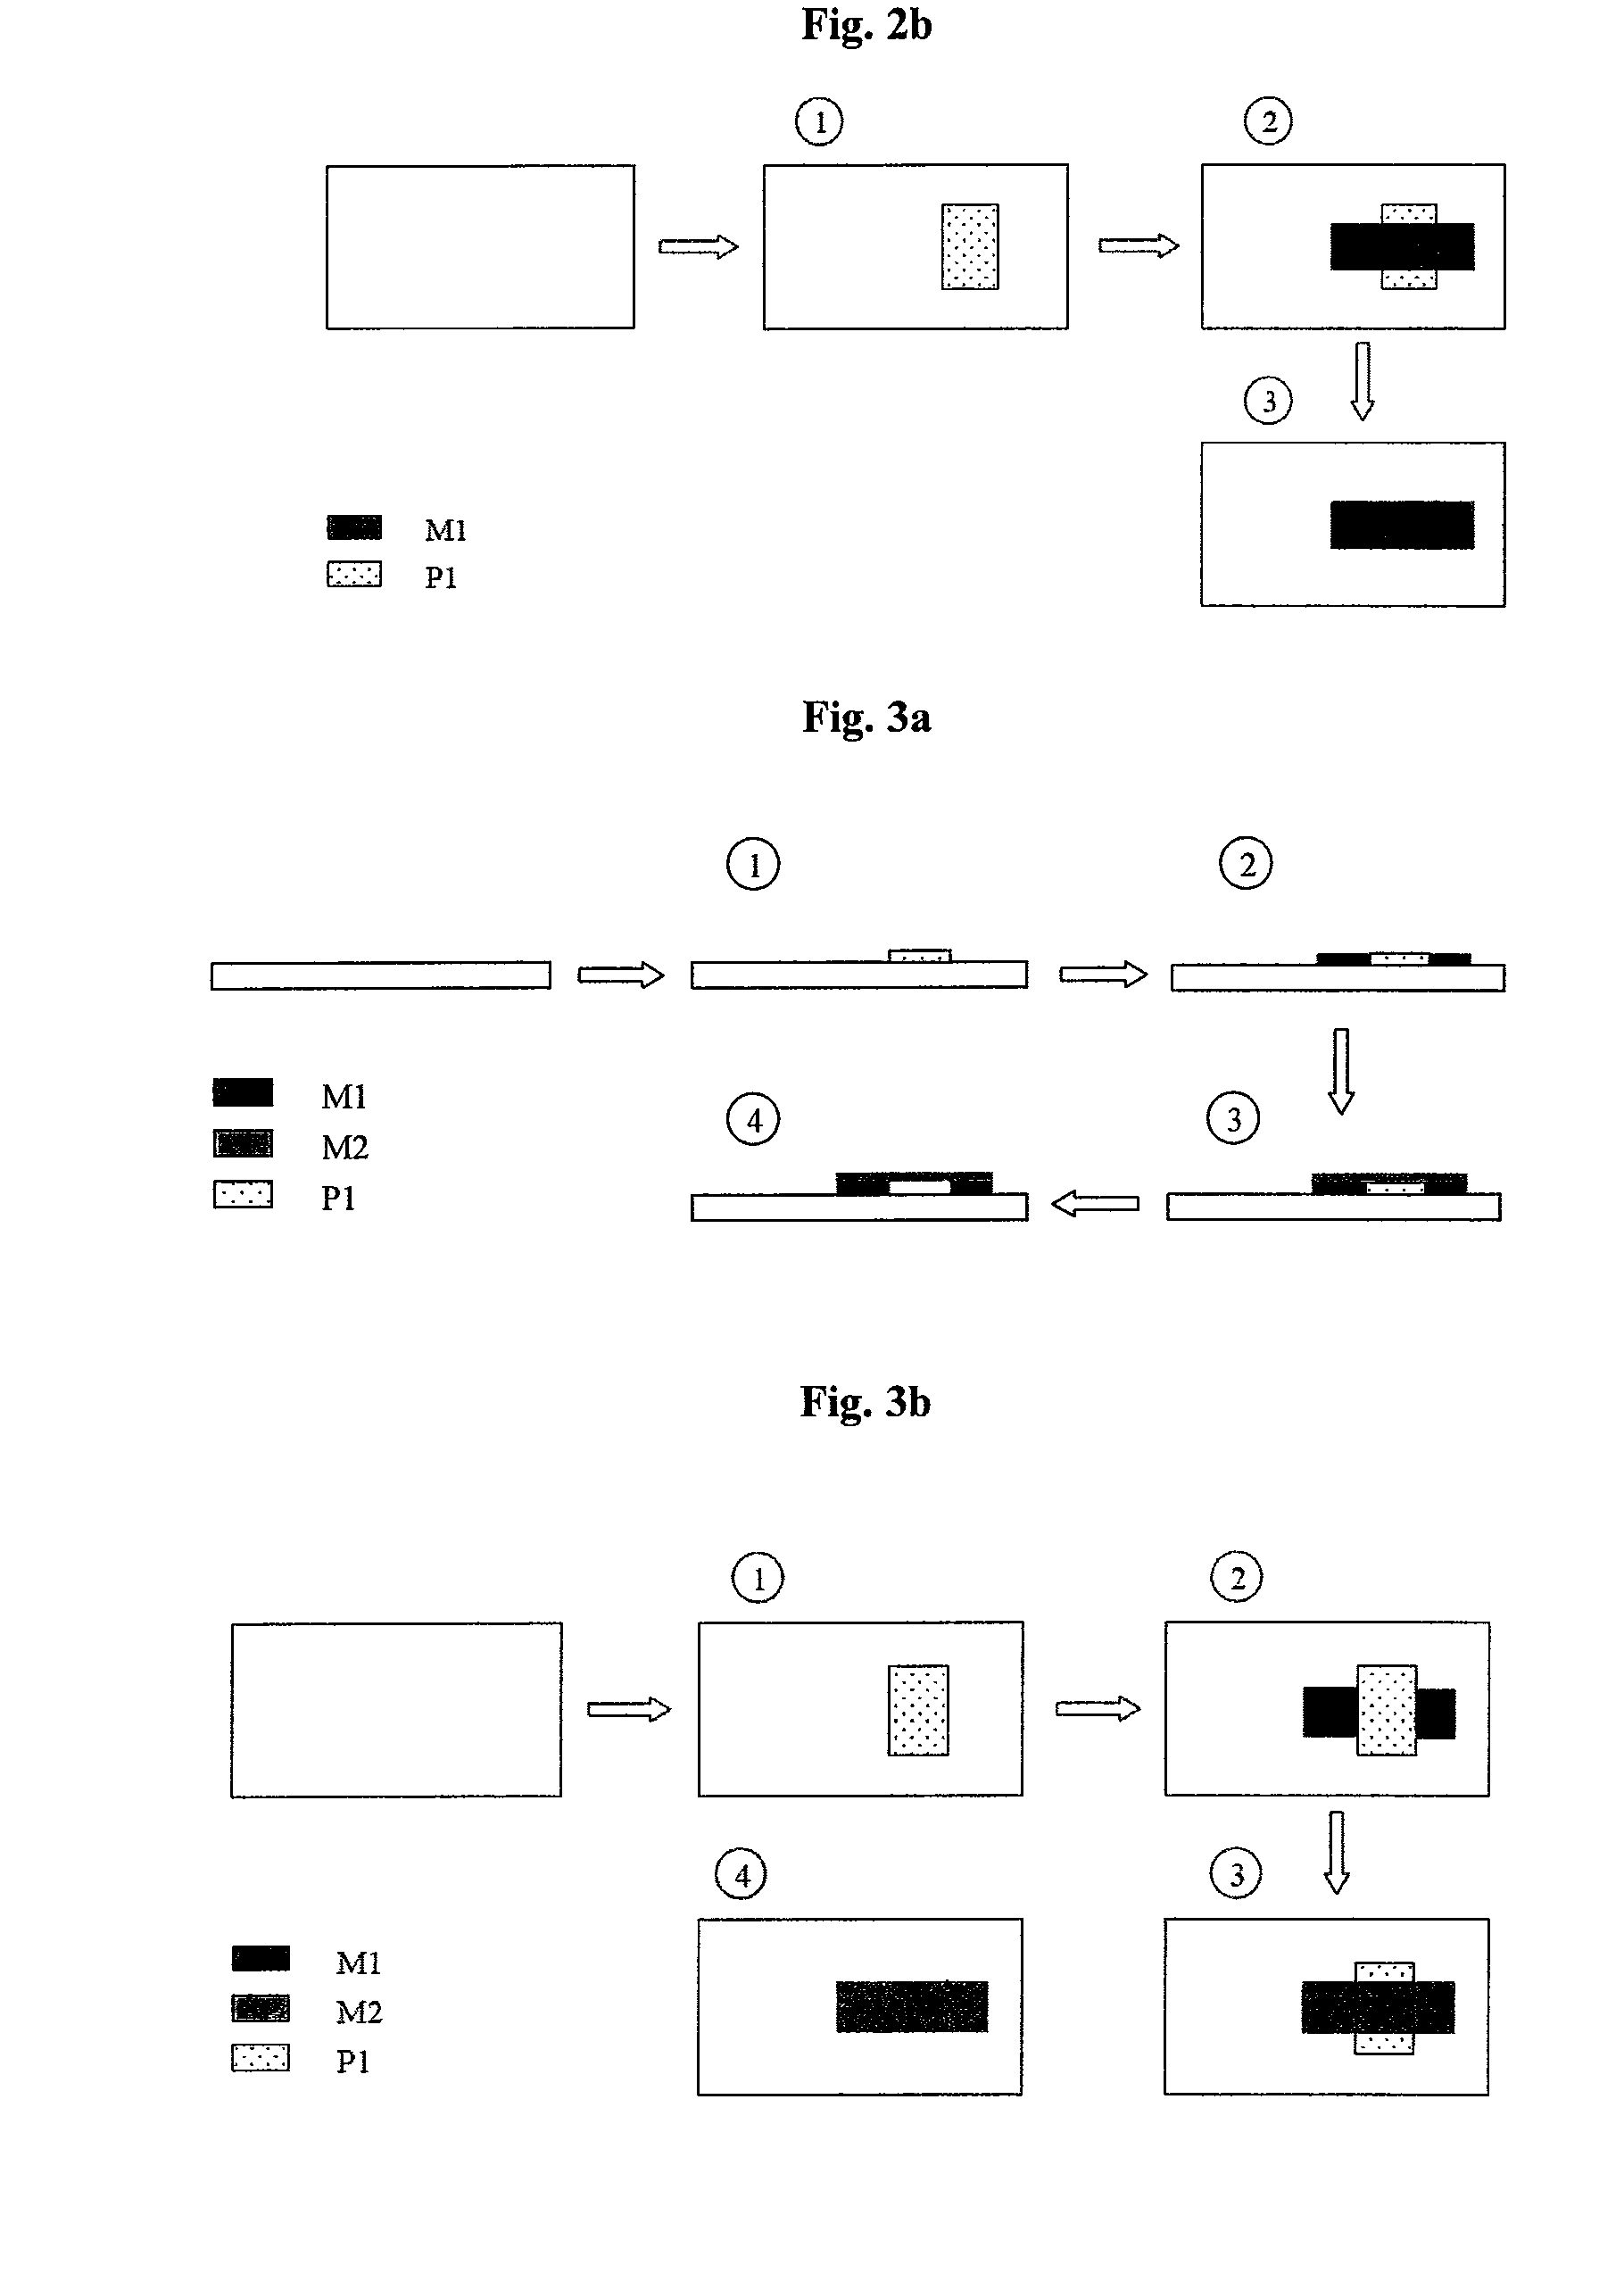 Method for producing a multilayer piezoelectric microcomponent using sacrificial thick film technology